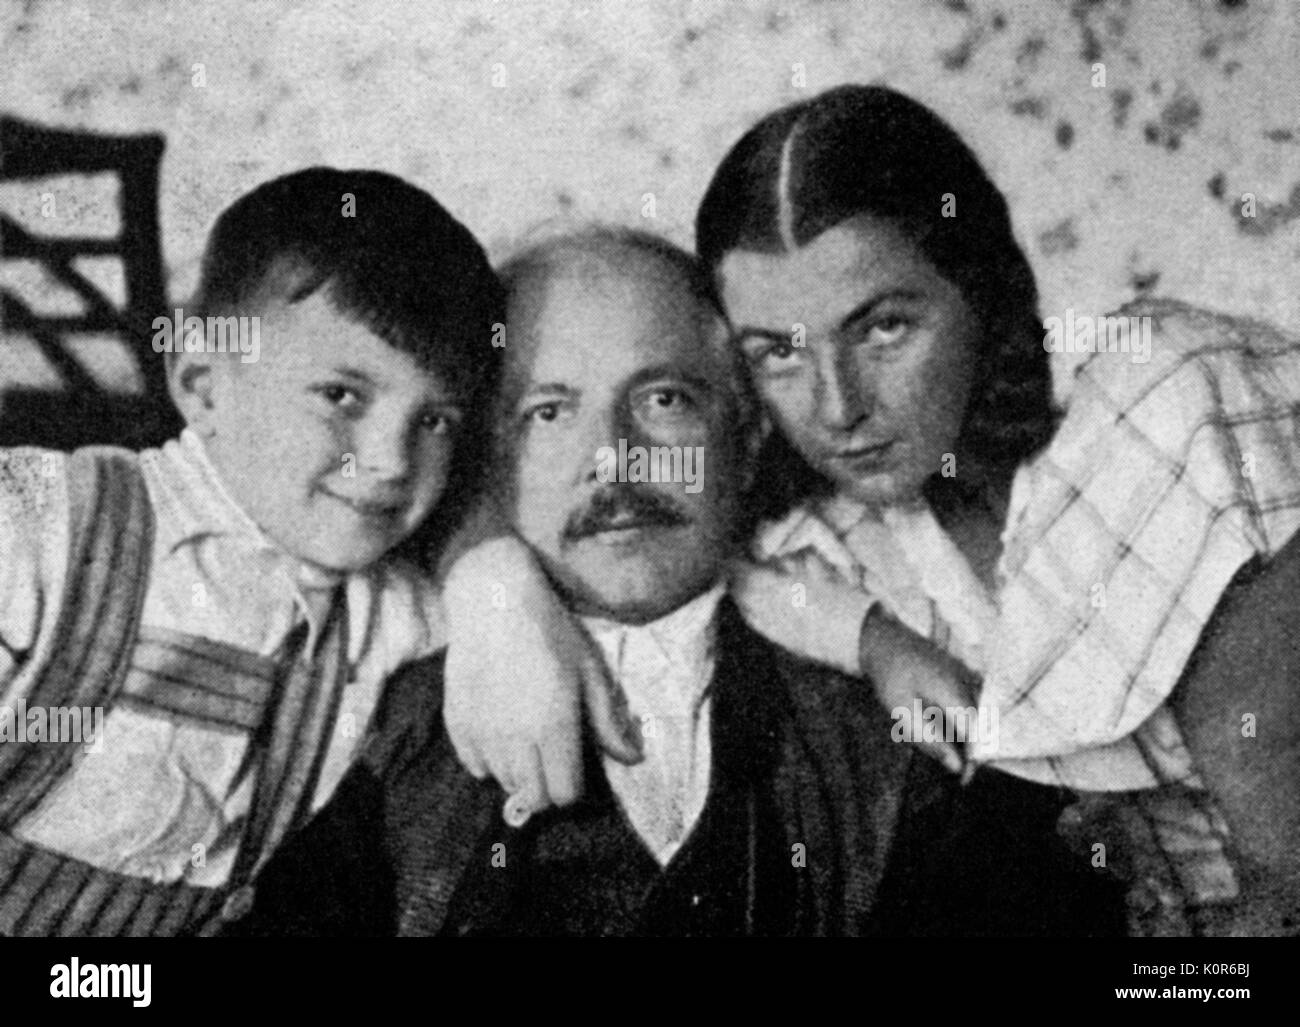 BARTOK, Bela - with his wife & son  Pasztory Dittaval and son Peterrel.  Hungarian composer and pianist (1881-1945) Stock Photo